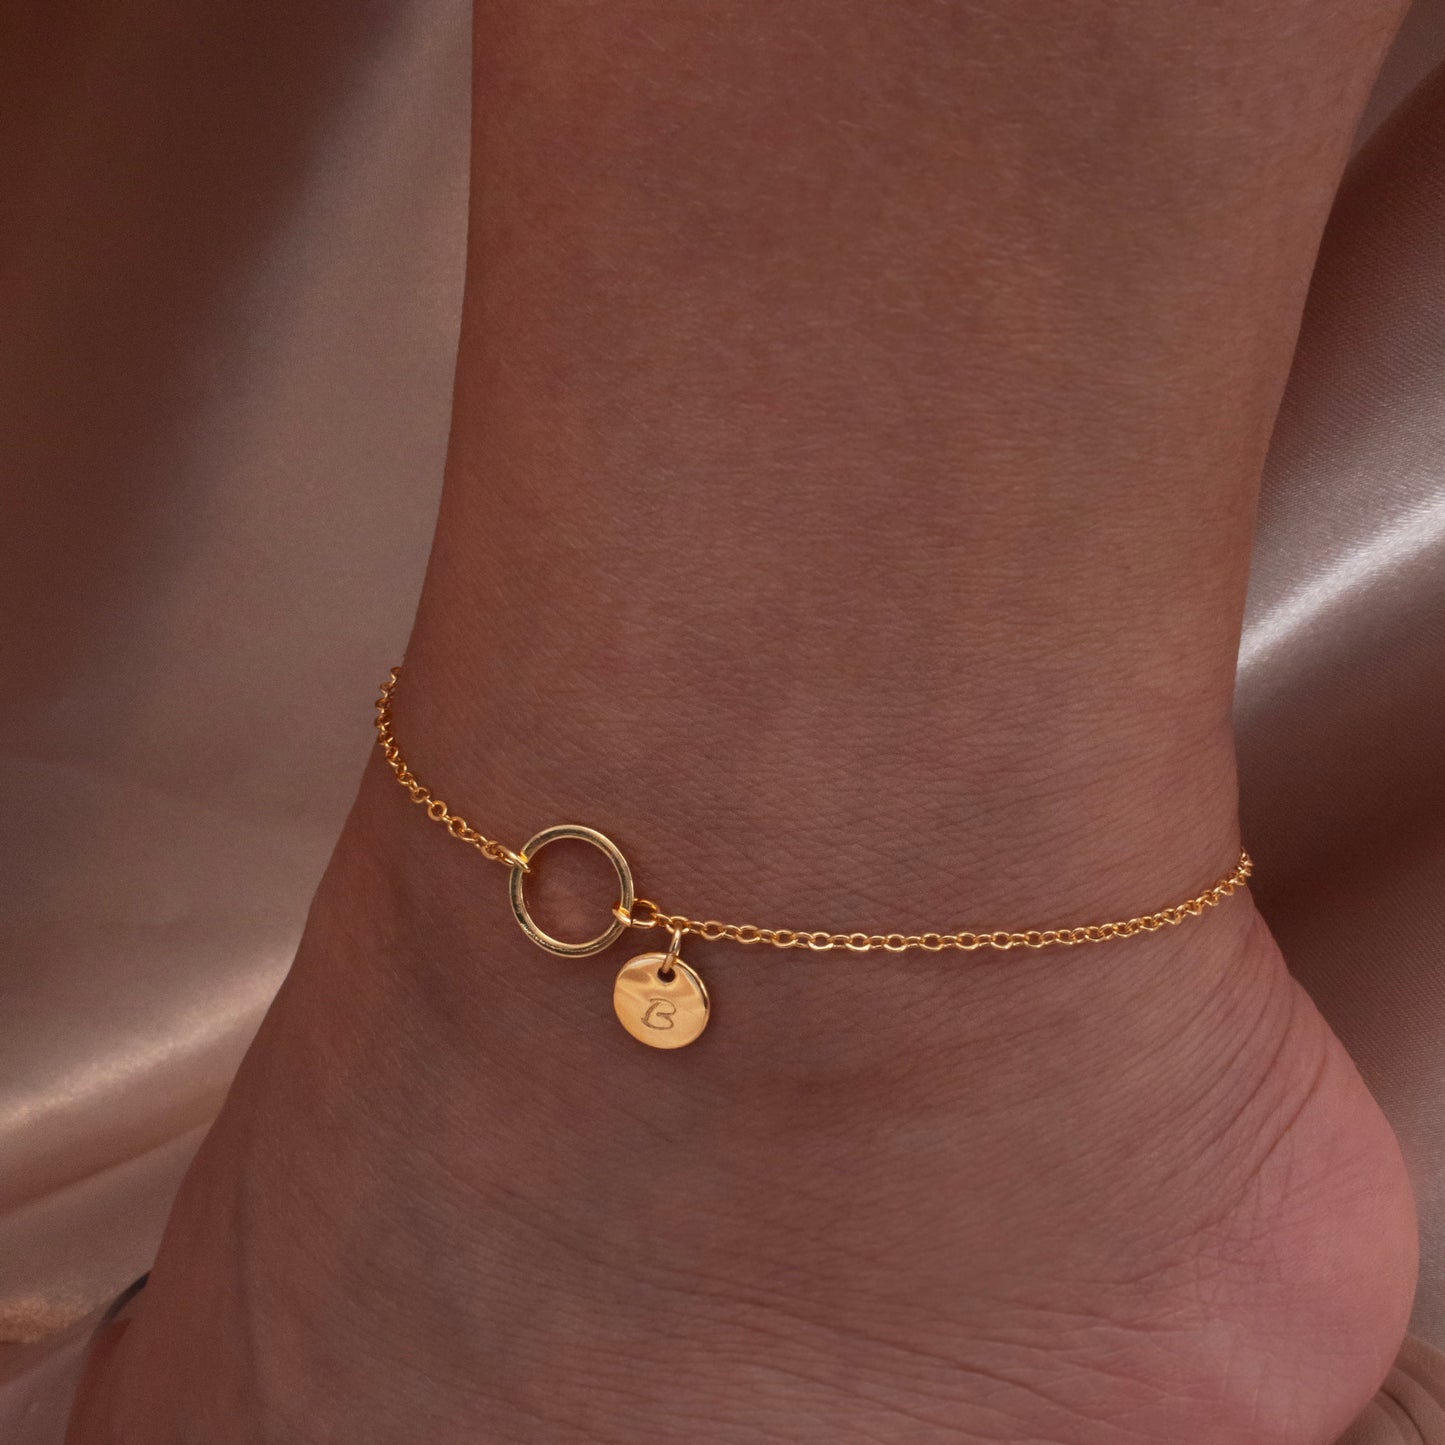 Delicate Circle Anklet Unique Ring Coin Anklets Initial Karma anklets cute Anklet Gift for her